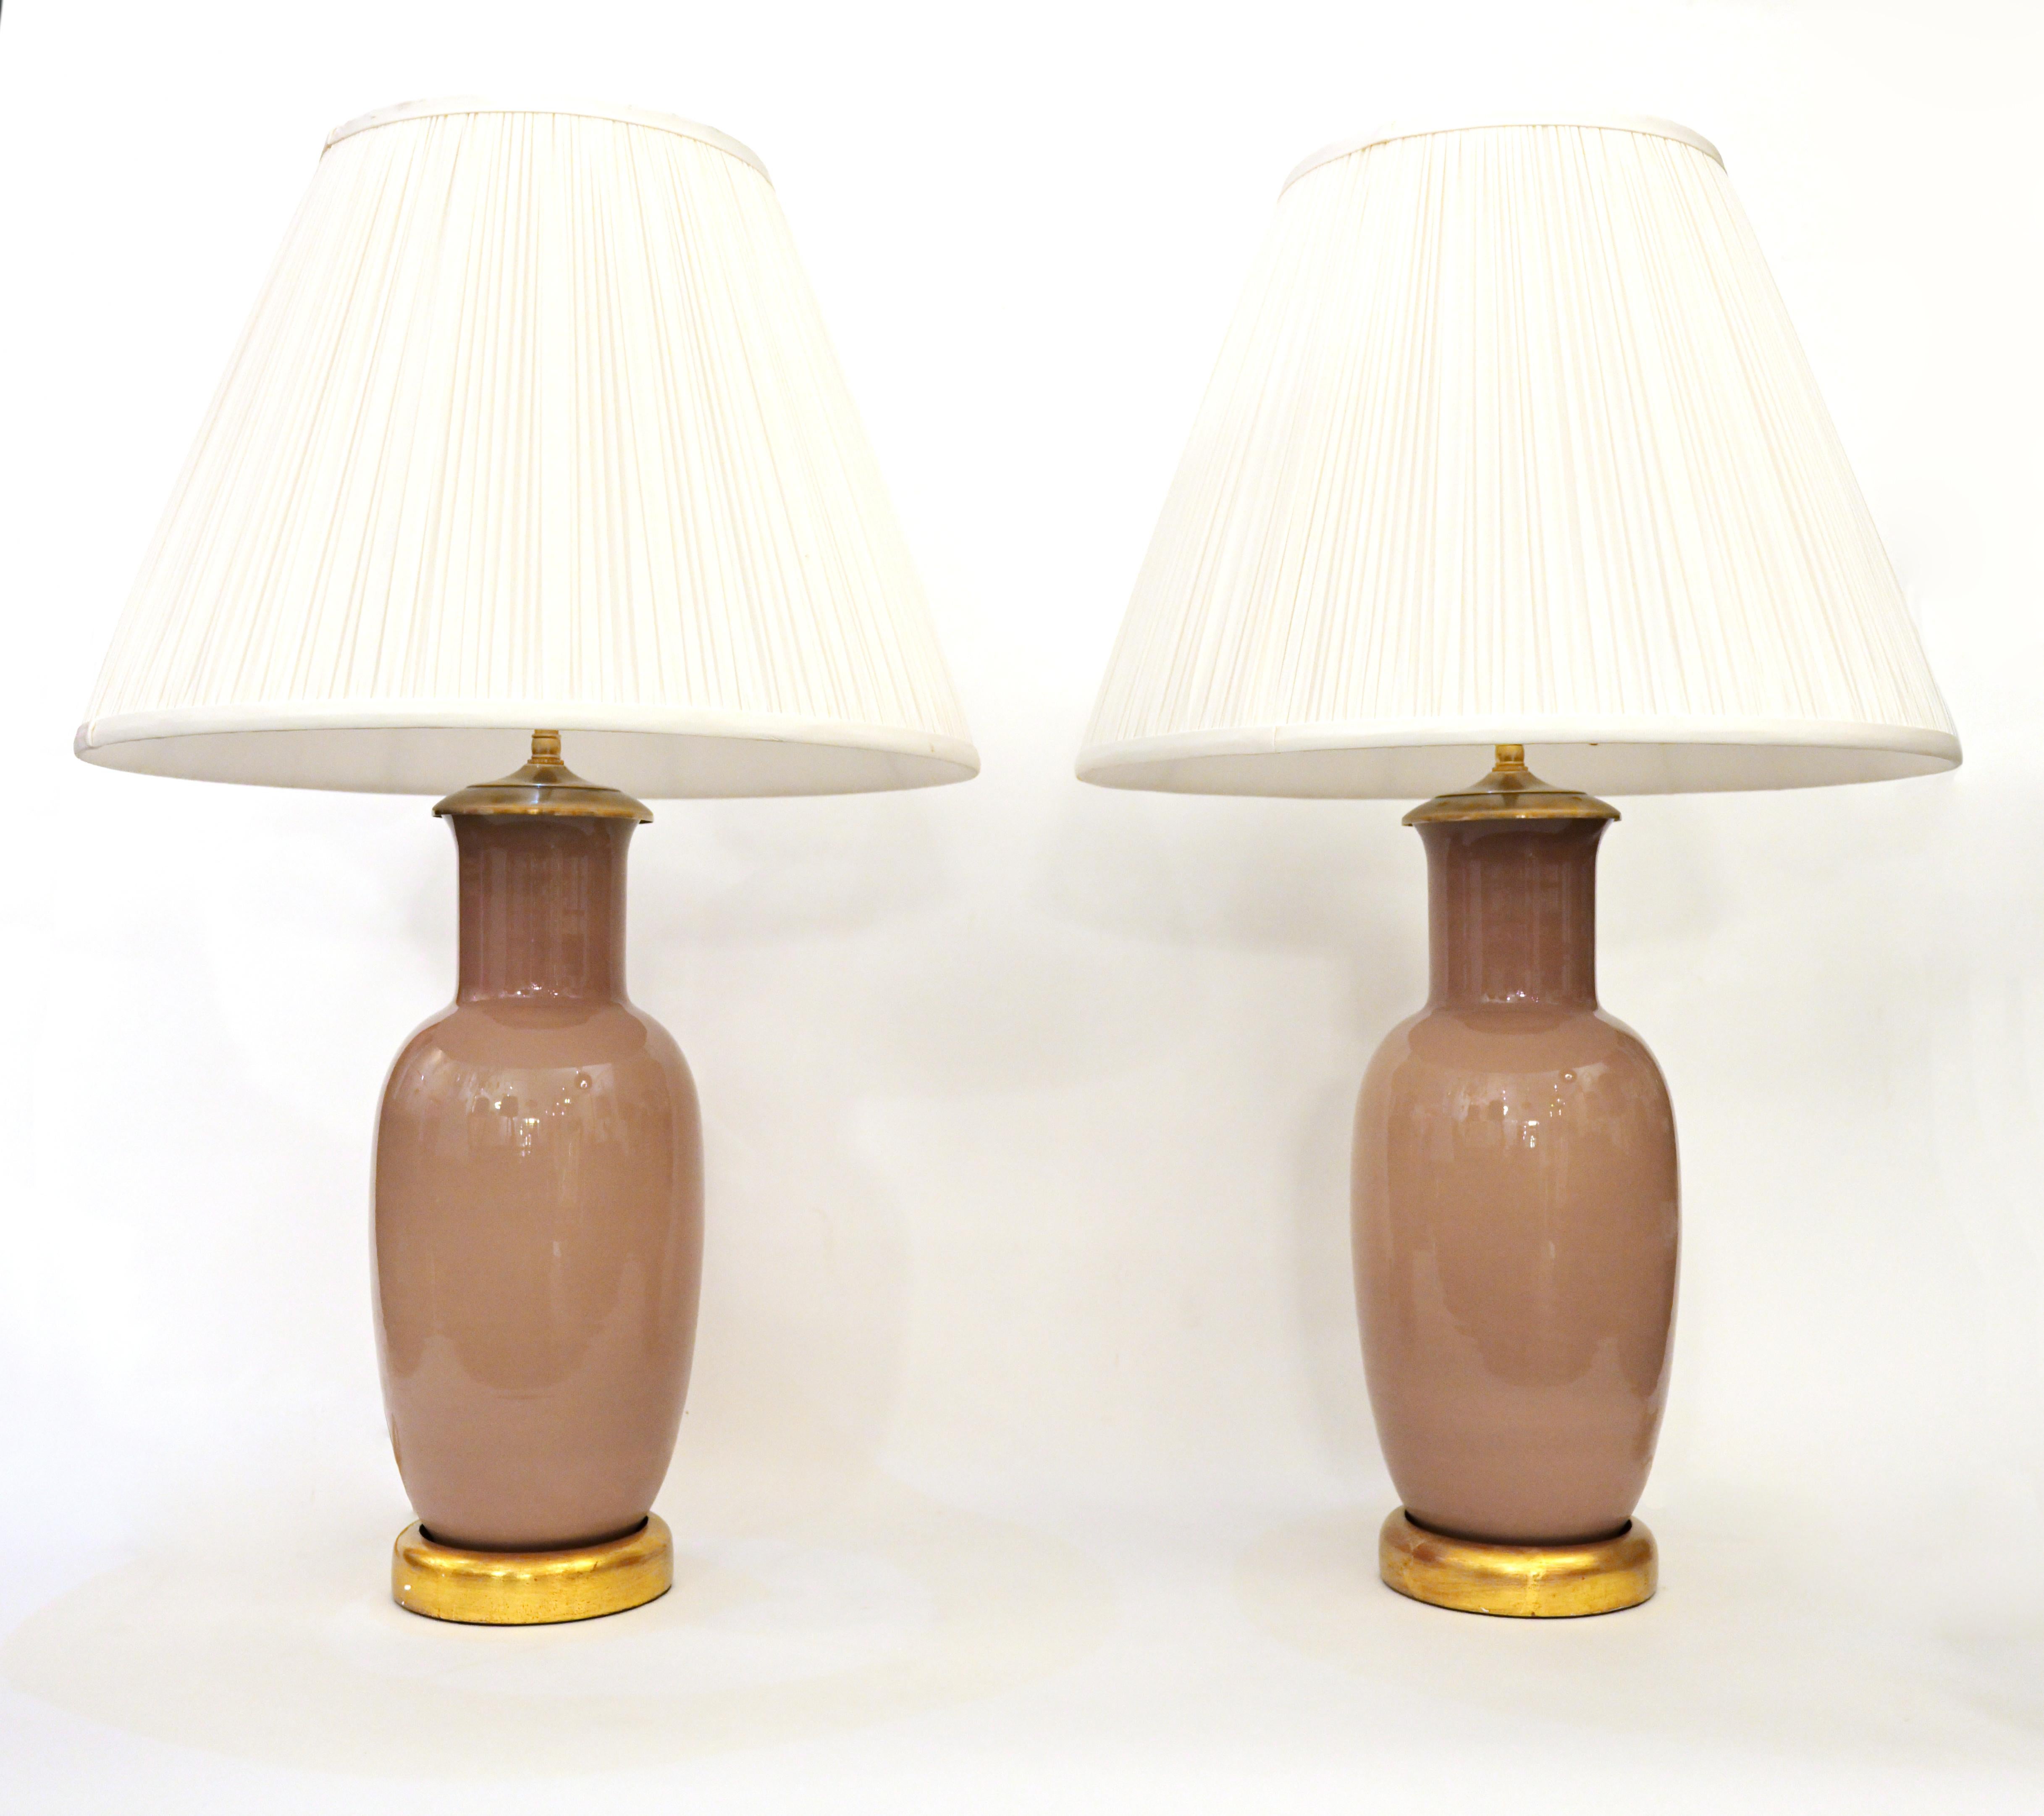 A pair of table lamps made from vintage Murano Glass having gilt wood bases and brass finials with adjustable double cluster, each sockets with 60 watts maximum. Shades are not included.

Center Diameter: 6.5